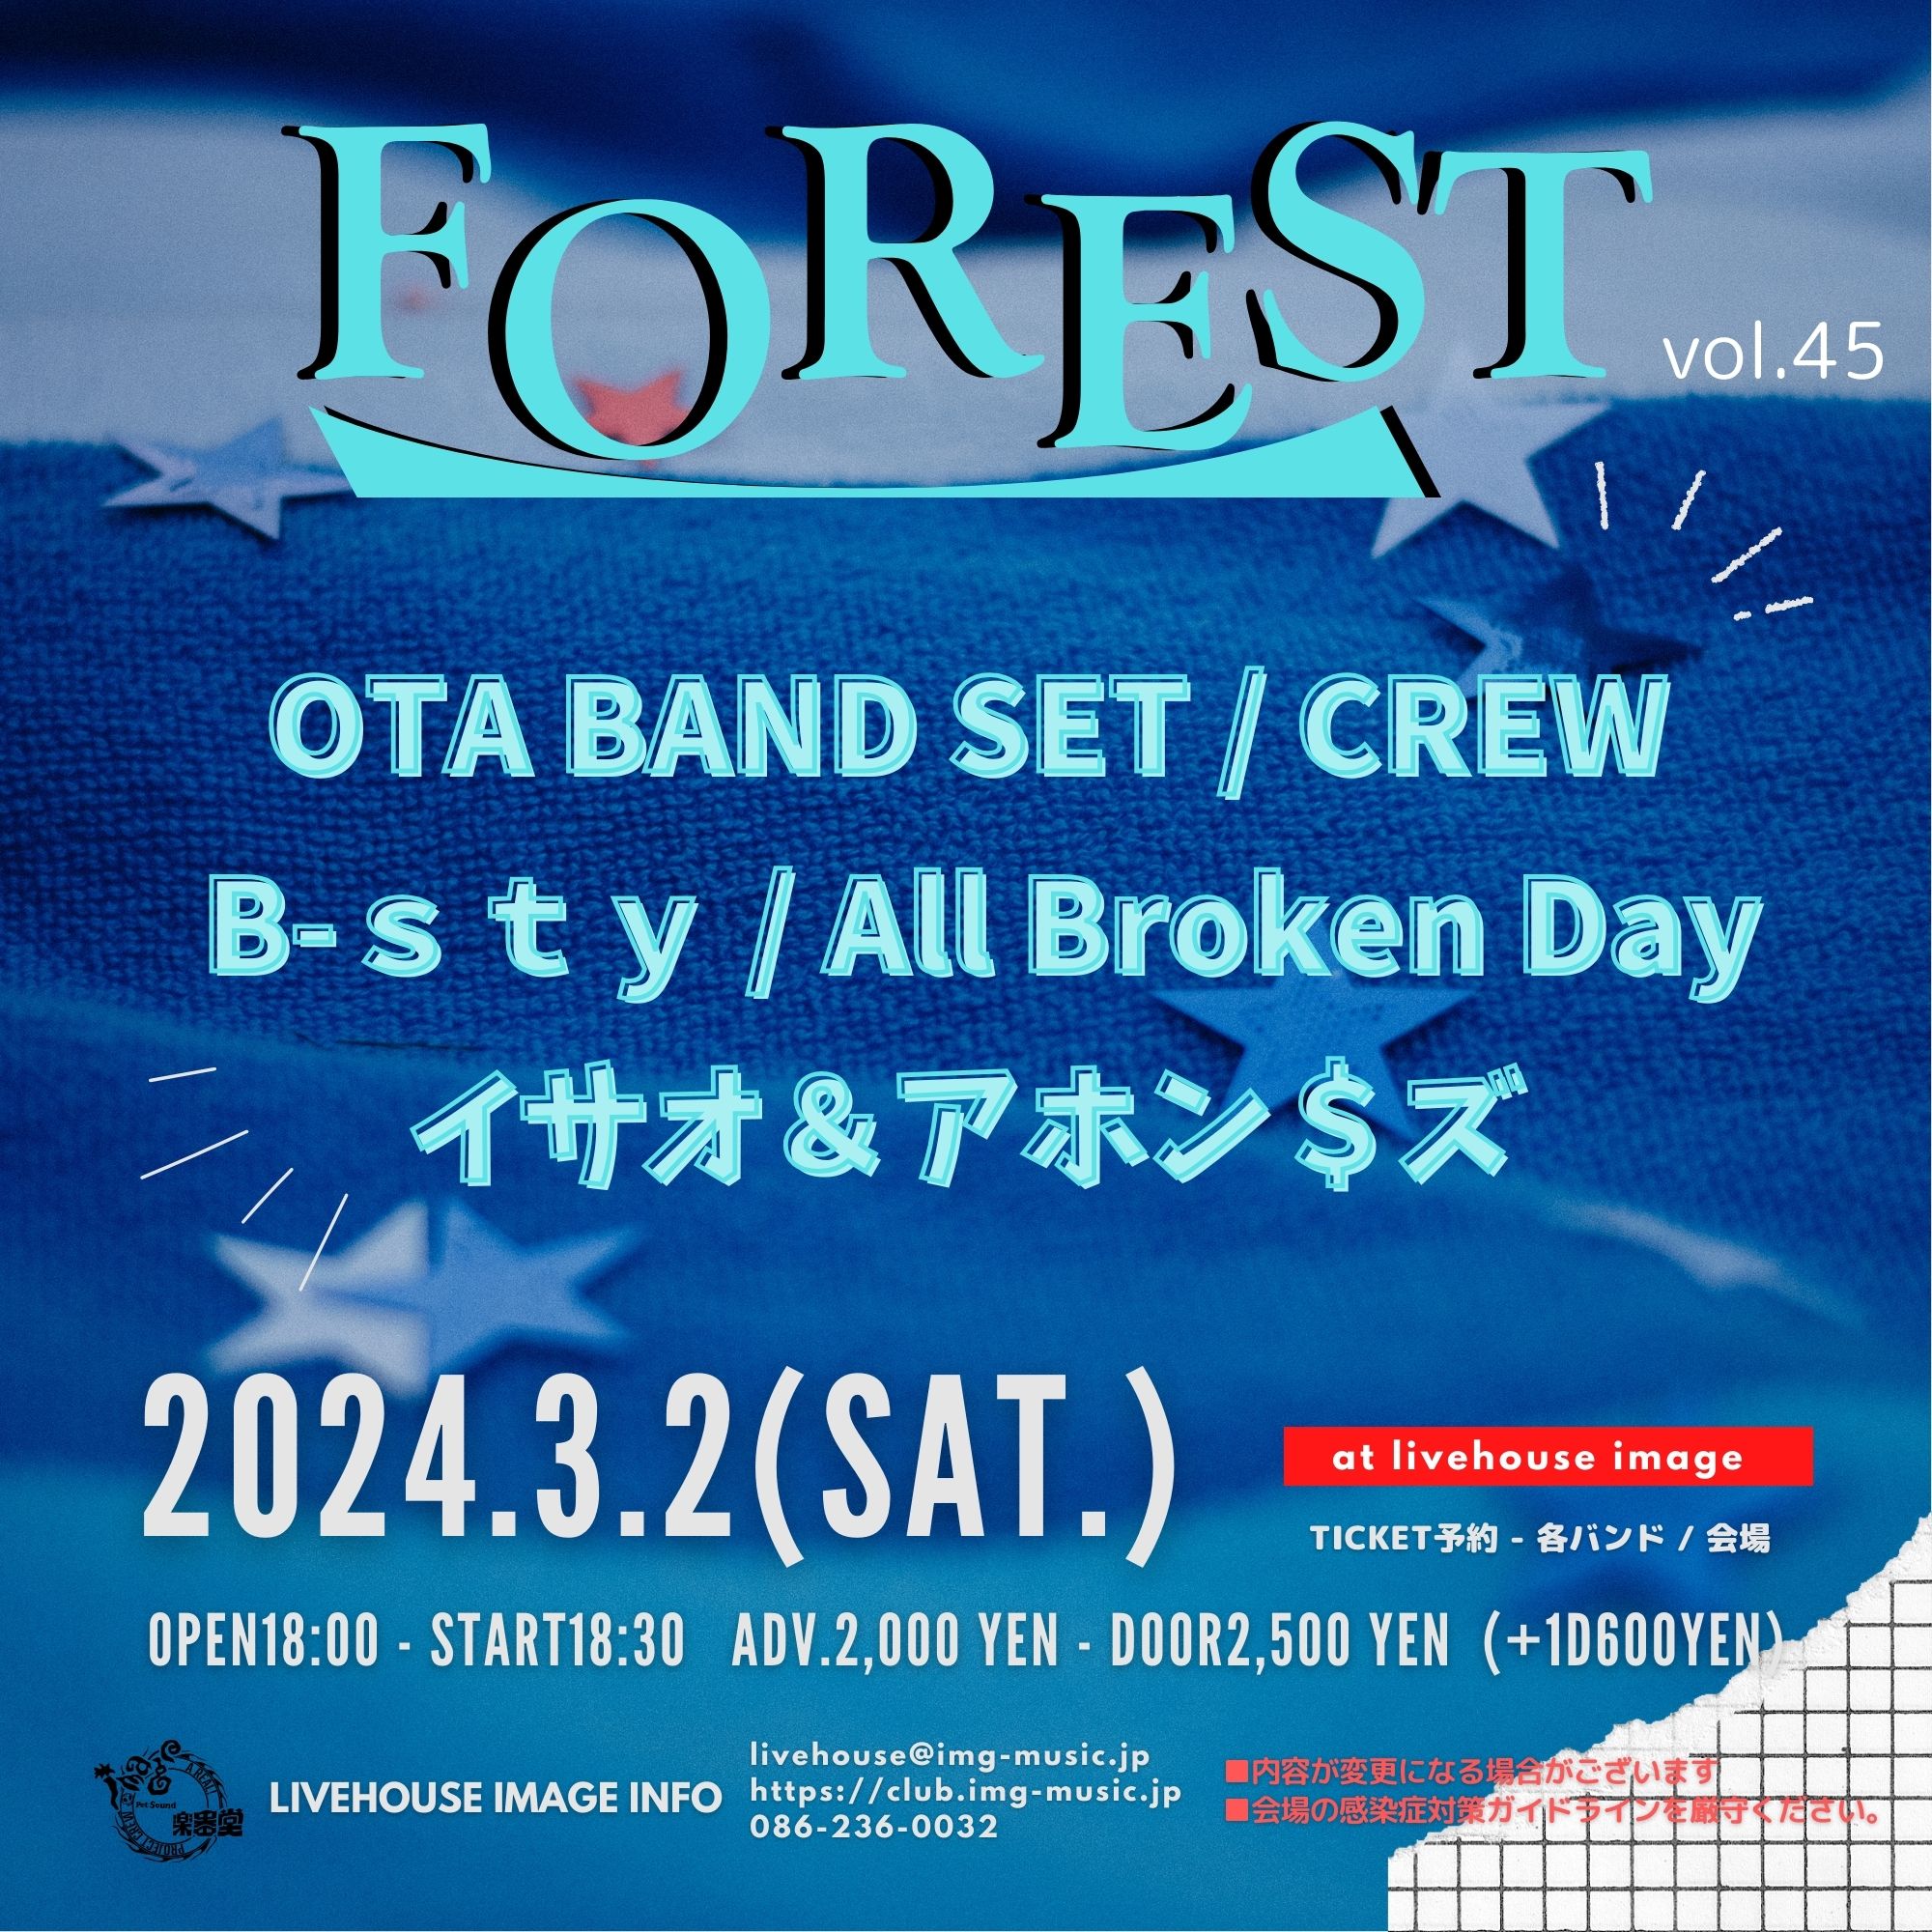 FOREST vol.45